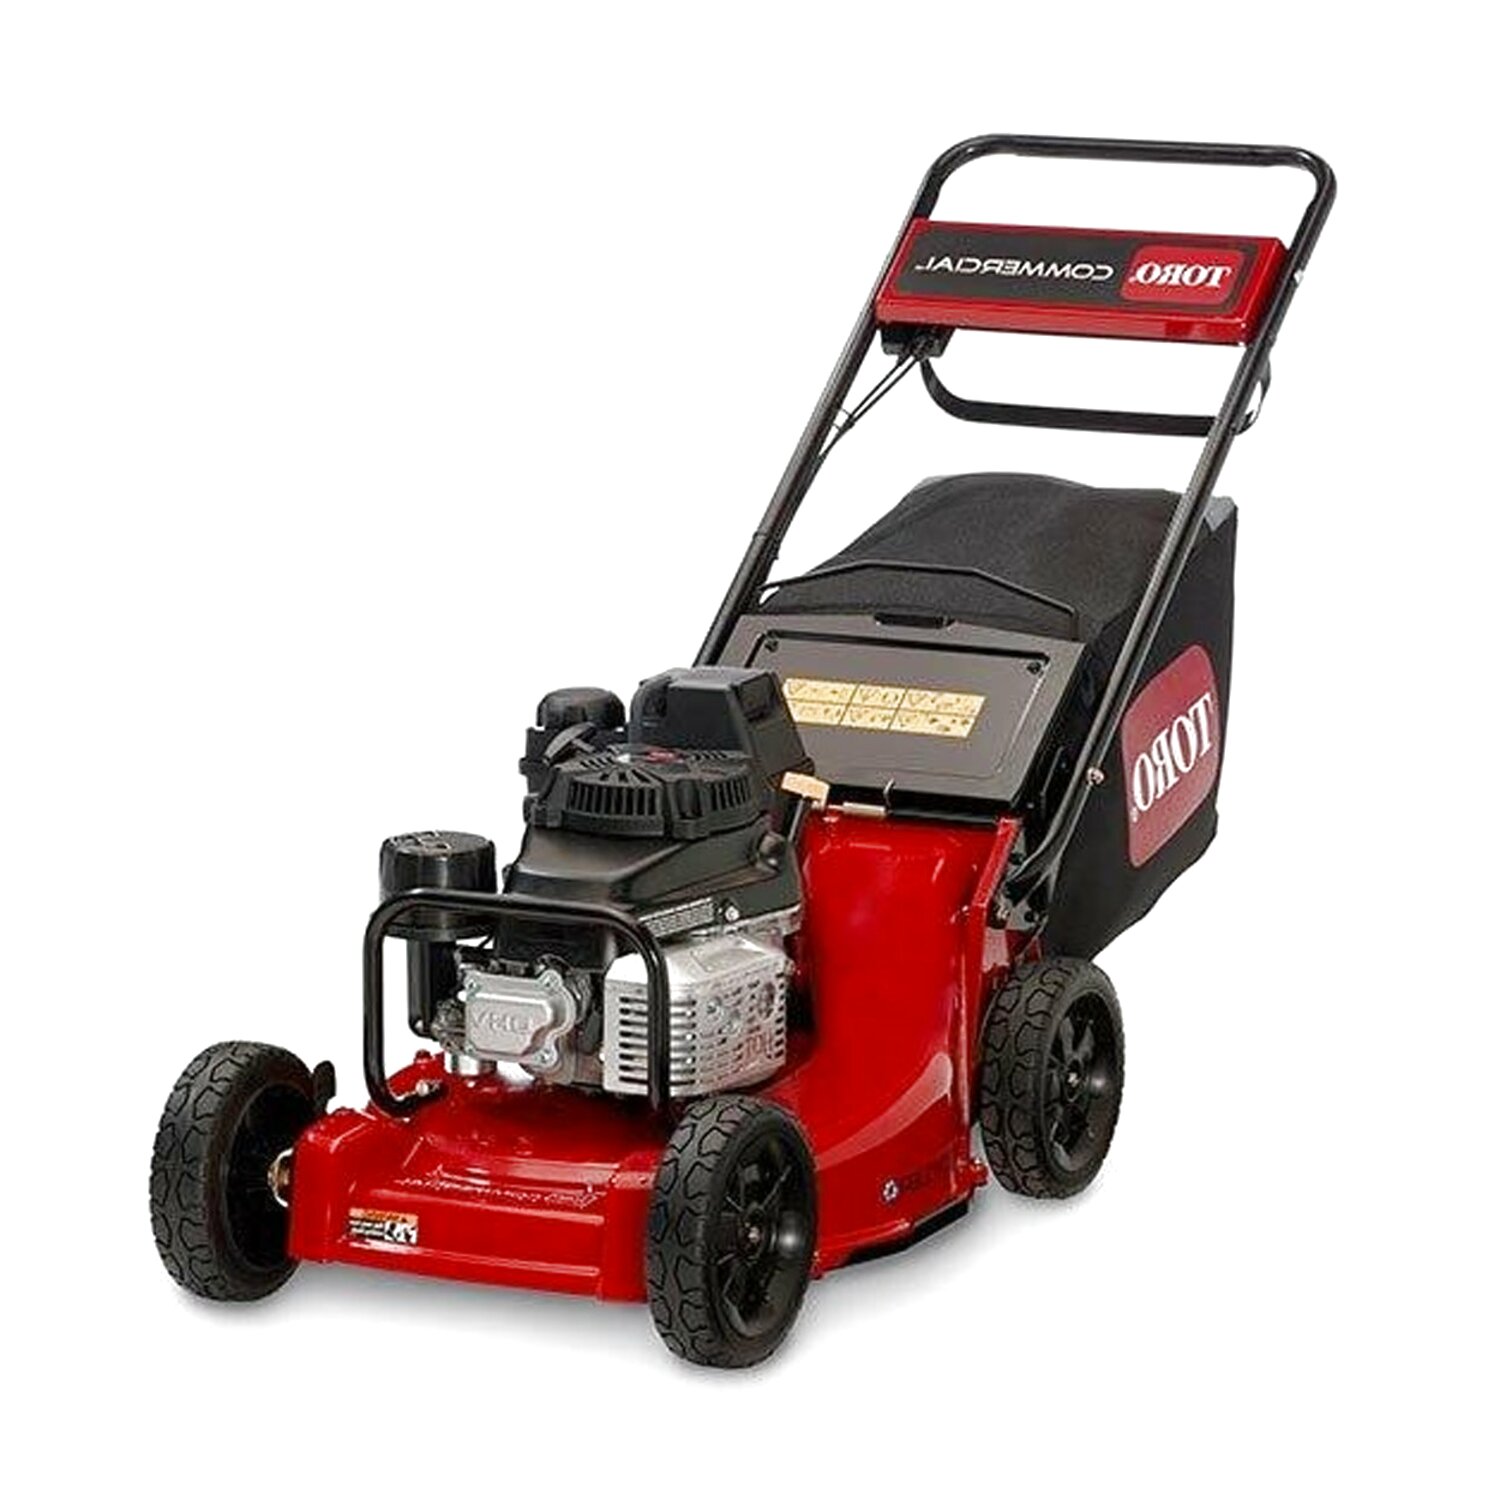 Toro Commercial Mowers for sale in UK View 54 bargains